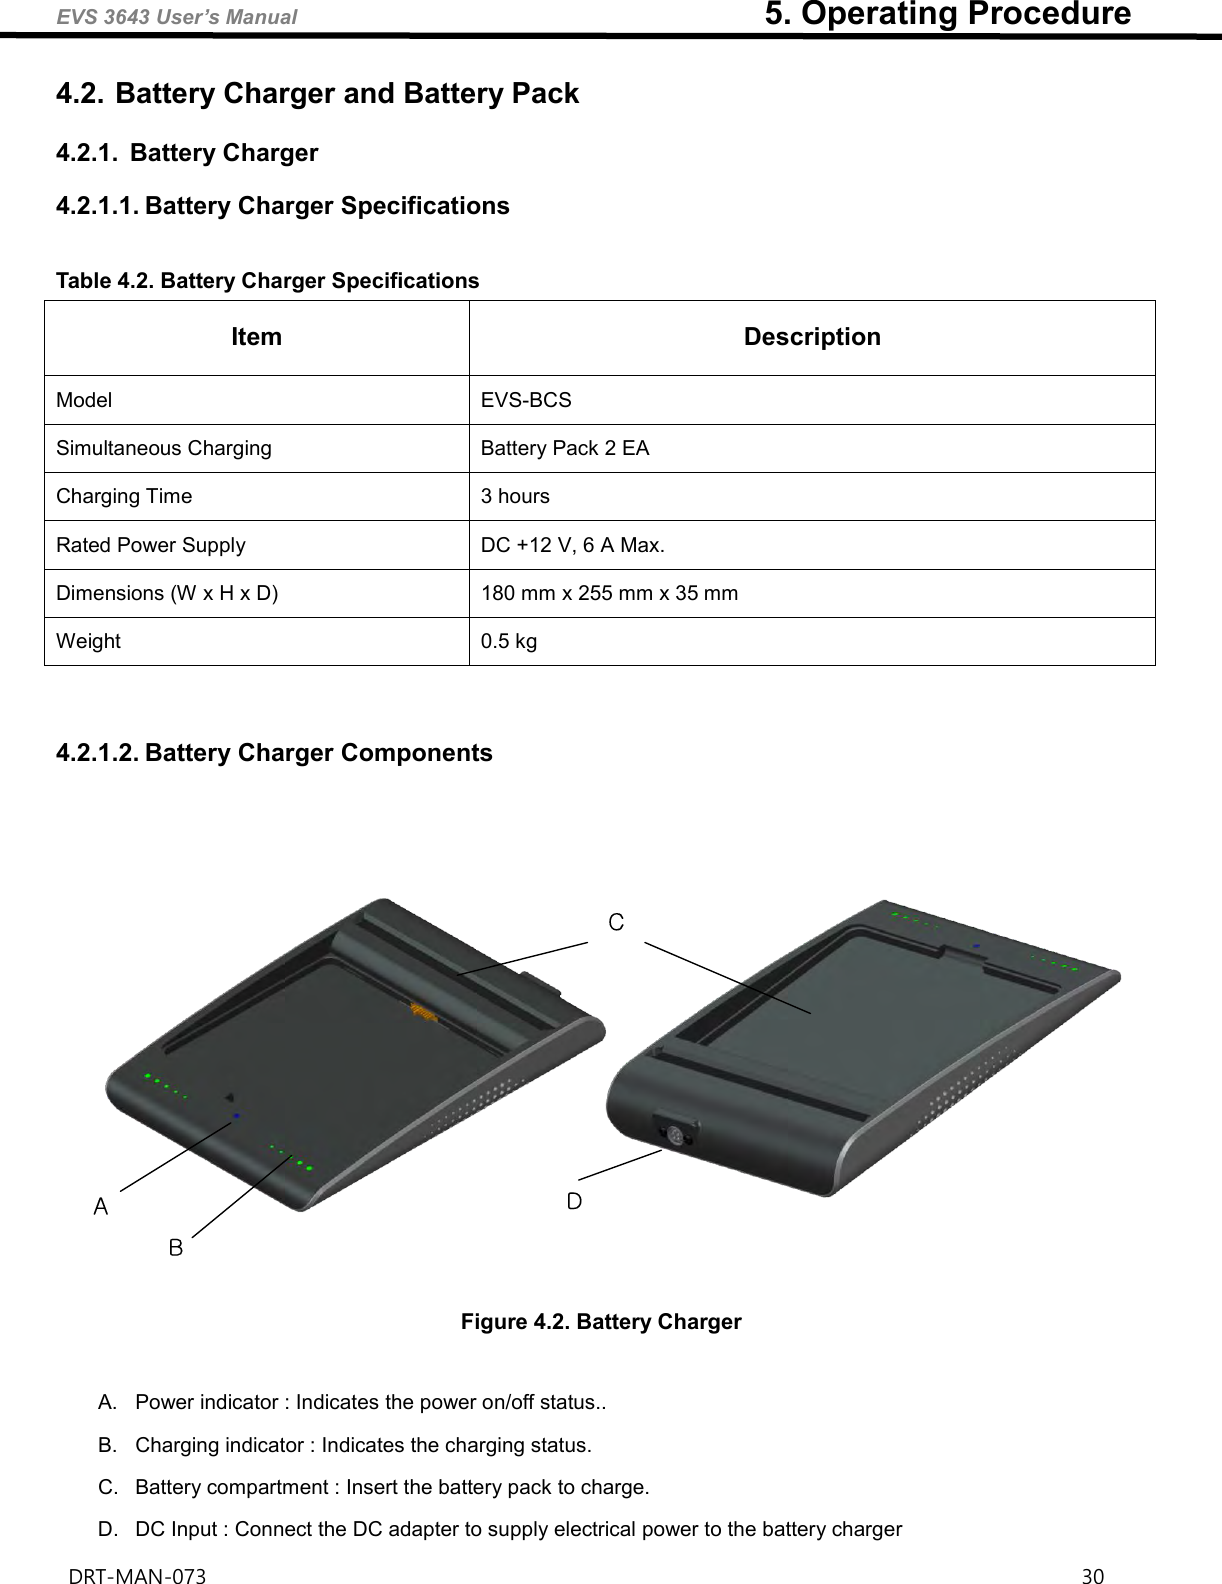 EVS 3643 User’s Manual                                                        5. Operating Procedure DRT-MAN-073                                                                                                                                                                30   4.2. Battery Charger and Battery Pack 4.2.1.  Battery Charger 4.2.1.1. Battery Charger Specifications  Table 4.2. Battery Charger Specifications Item Description Model EVS-BCS Simultaneous Charging   Battery Pack 2 EA   Charging Time   3 hours   Rated Power Supply DC +12 V, 6 A Max.   Dimensions (W x H x D) 180 mm x 255 mm x 35 mm Weight 0.5 kg    4.2.1.2. Battery Charger Components     ABDC Figure 4.2. Battery Charger  A.  Power indicator : Indicates the power on/off status.. B.  Charging indicator : Indicates the charging status.   C.  Battery compartment : Insert the battery pack to charge.   D.  DC Input : Connect the DC adapter to supply electrical power to the battery charger    